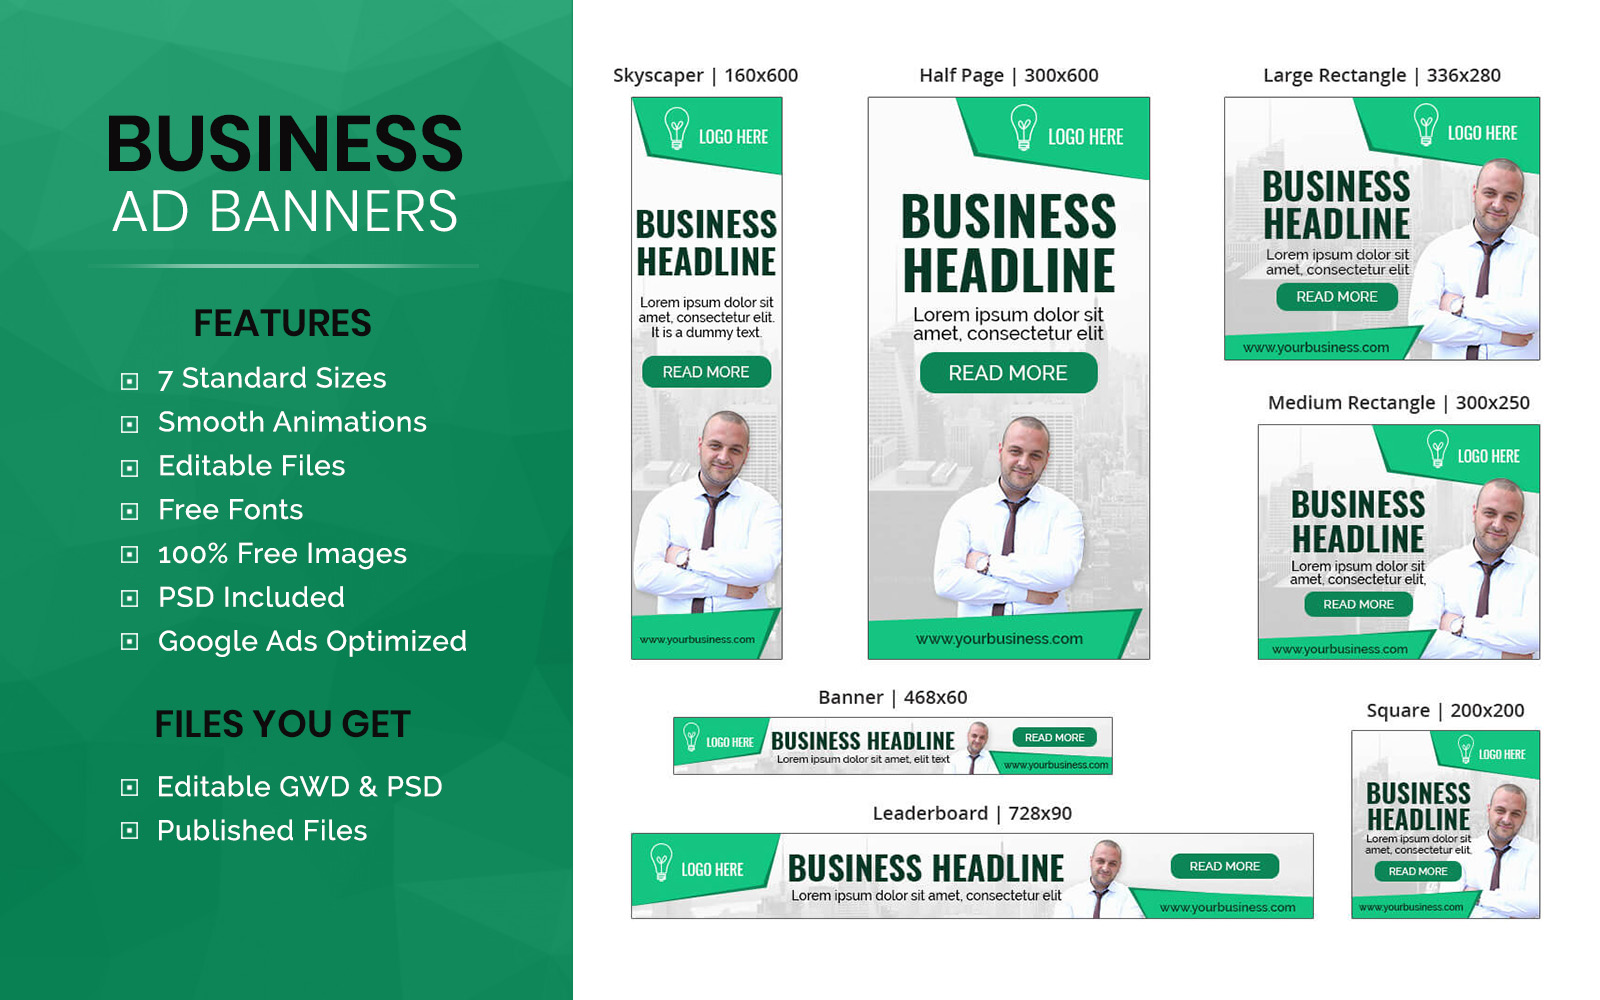 Business Banner - HTML5 Ad Template (BU007)